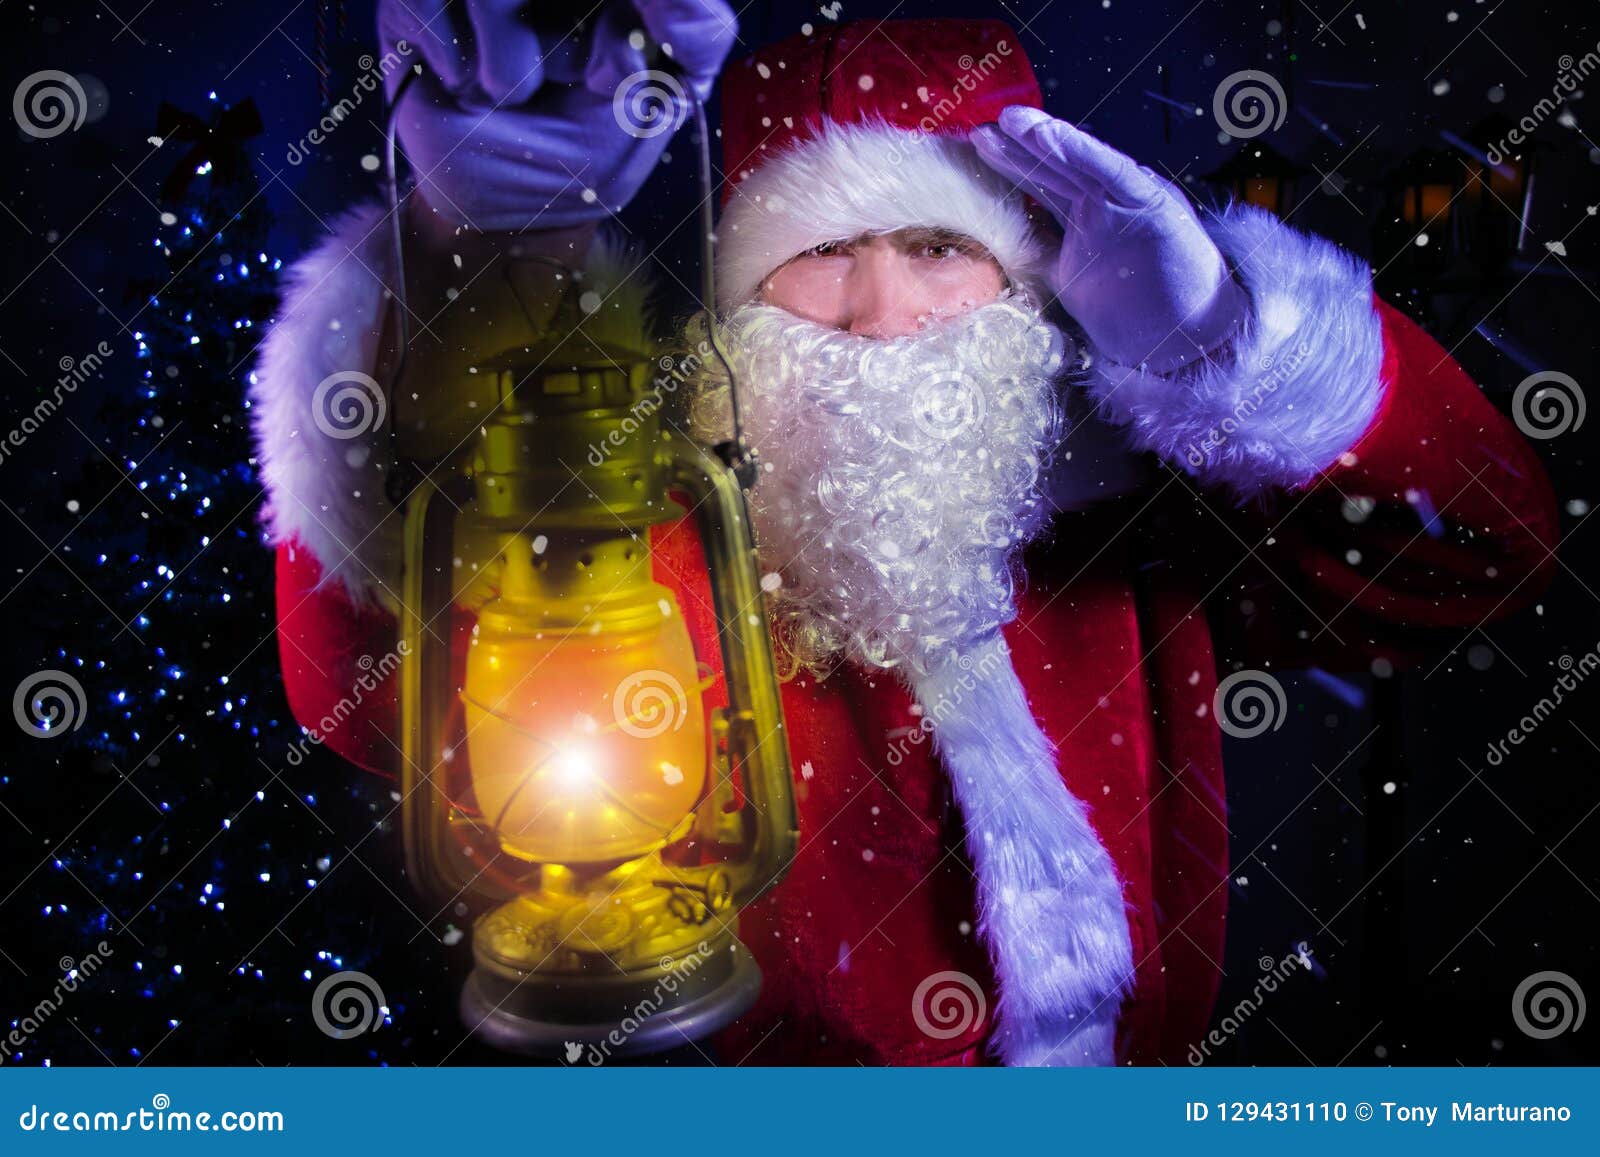 young santa clause, carrying lantern looks through blizard of snow with christmas tree and street lamp in background